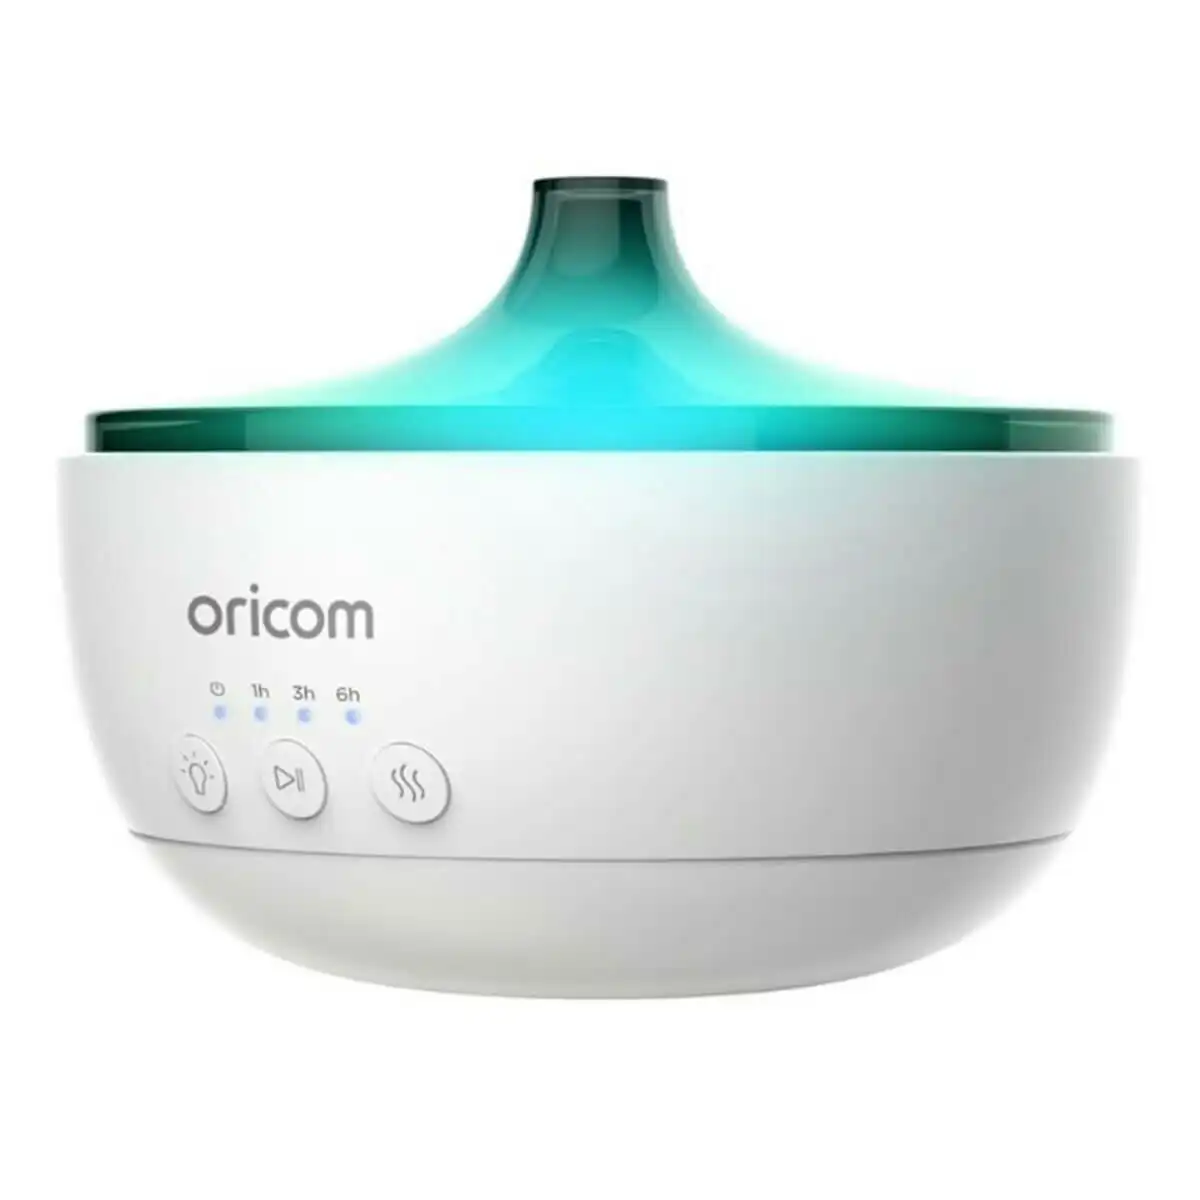 Oricom 4 in 1 Diffuser and Humidifier with Night Light and Speaker